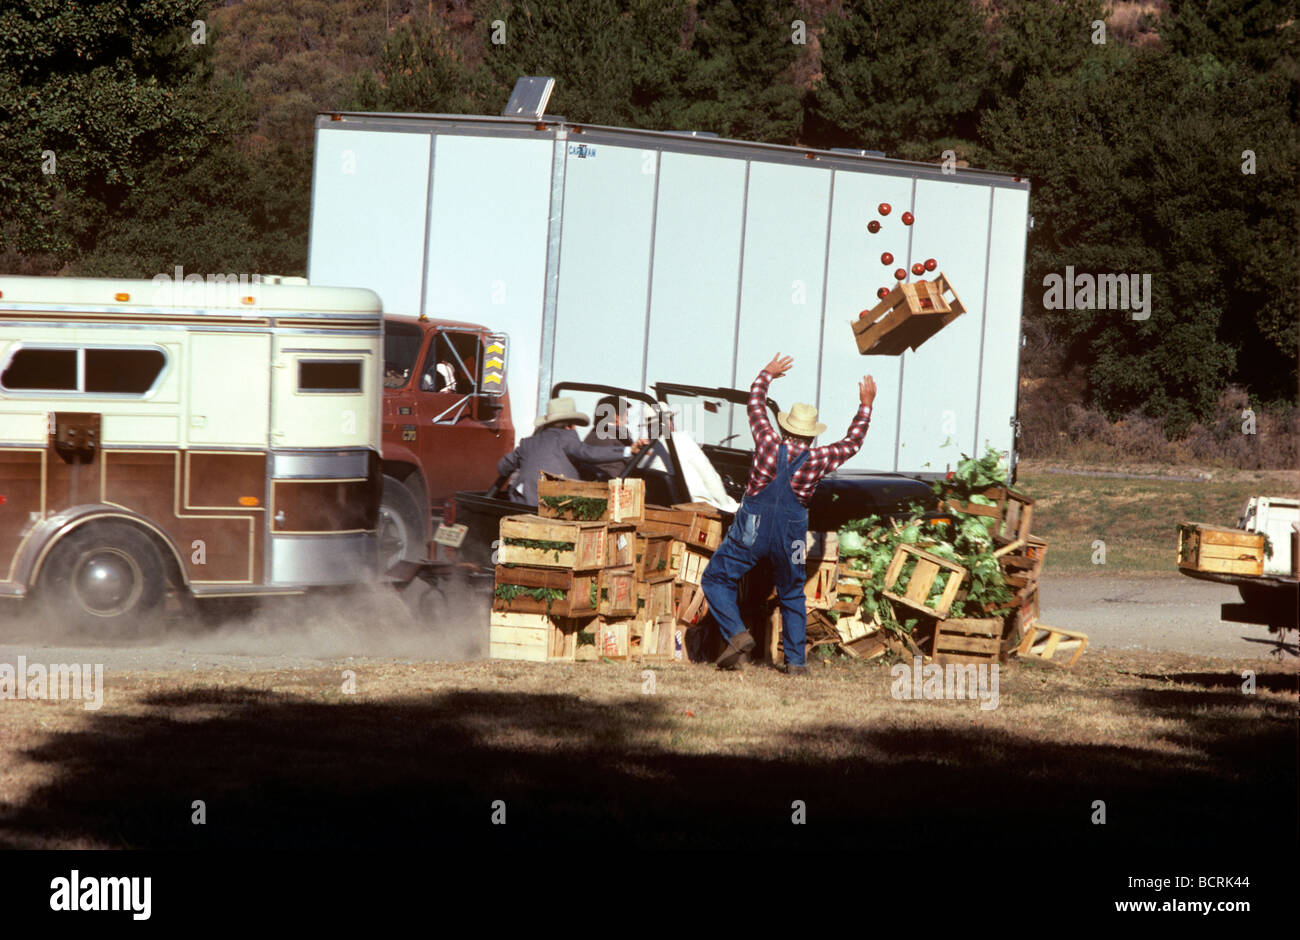 Stunt crash for motion picture production Stock Photo